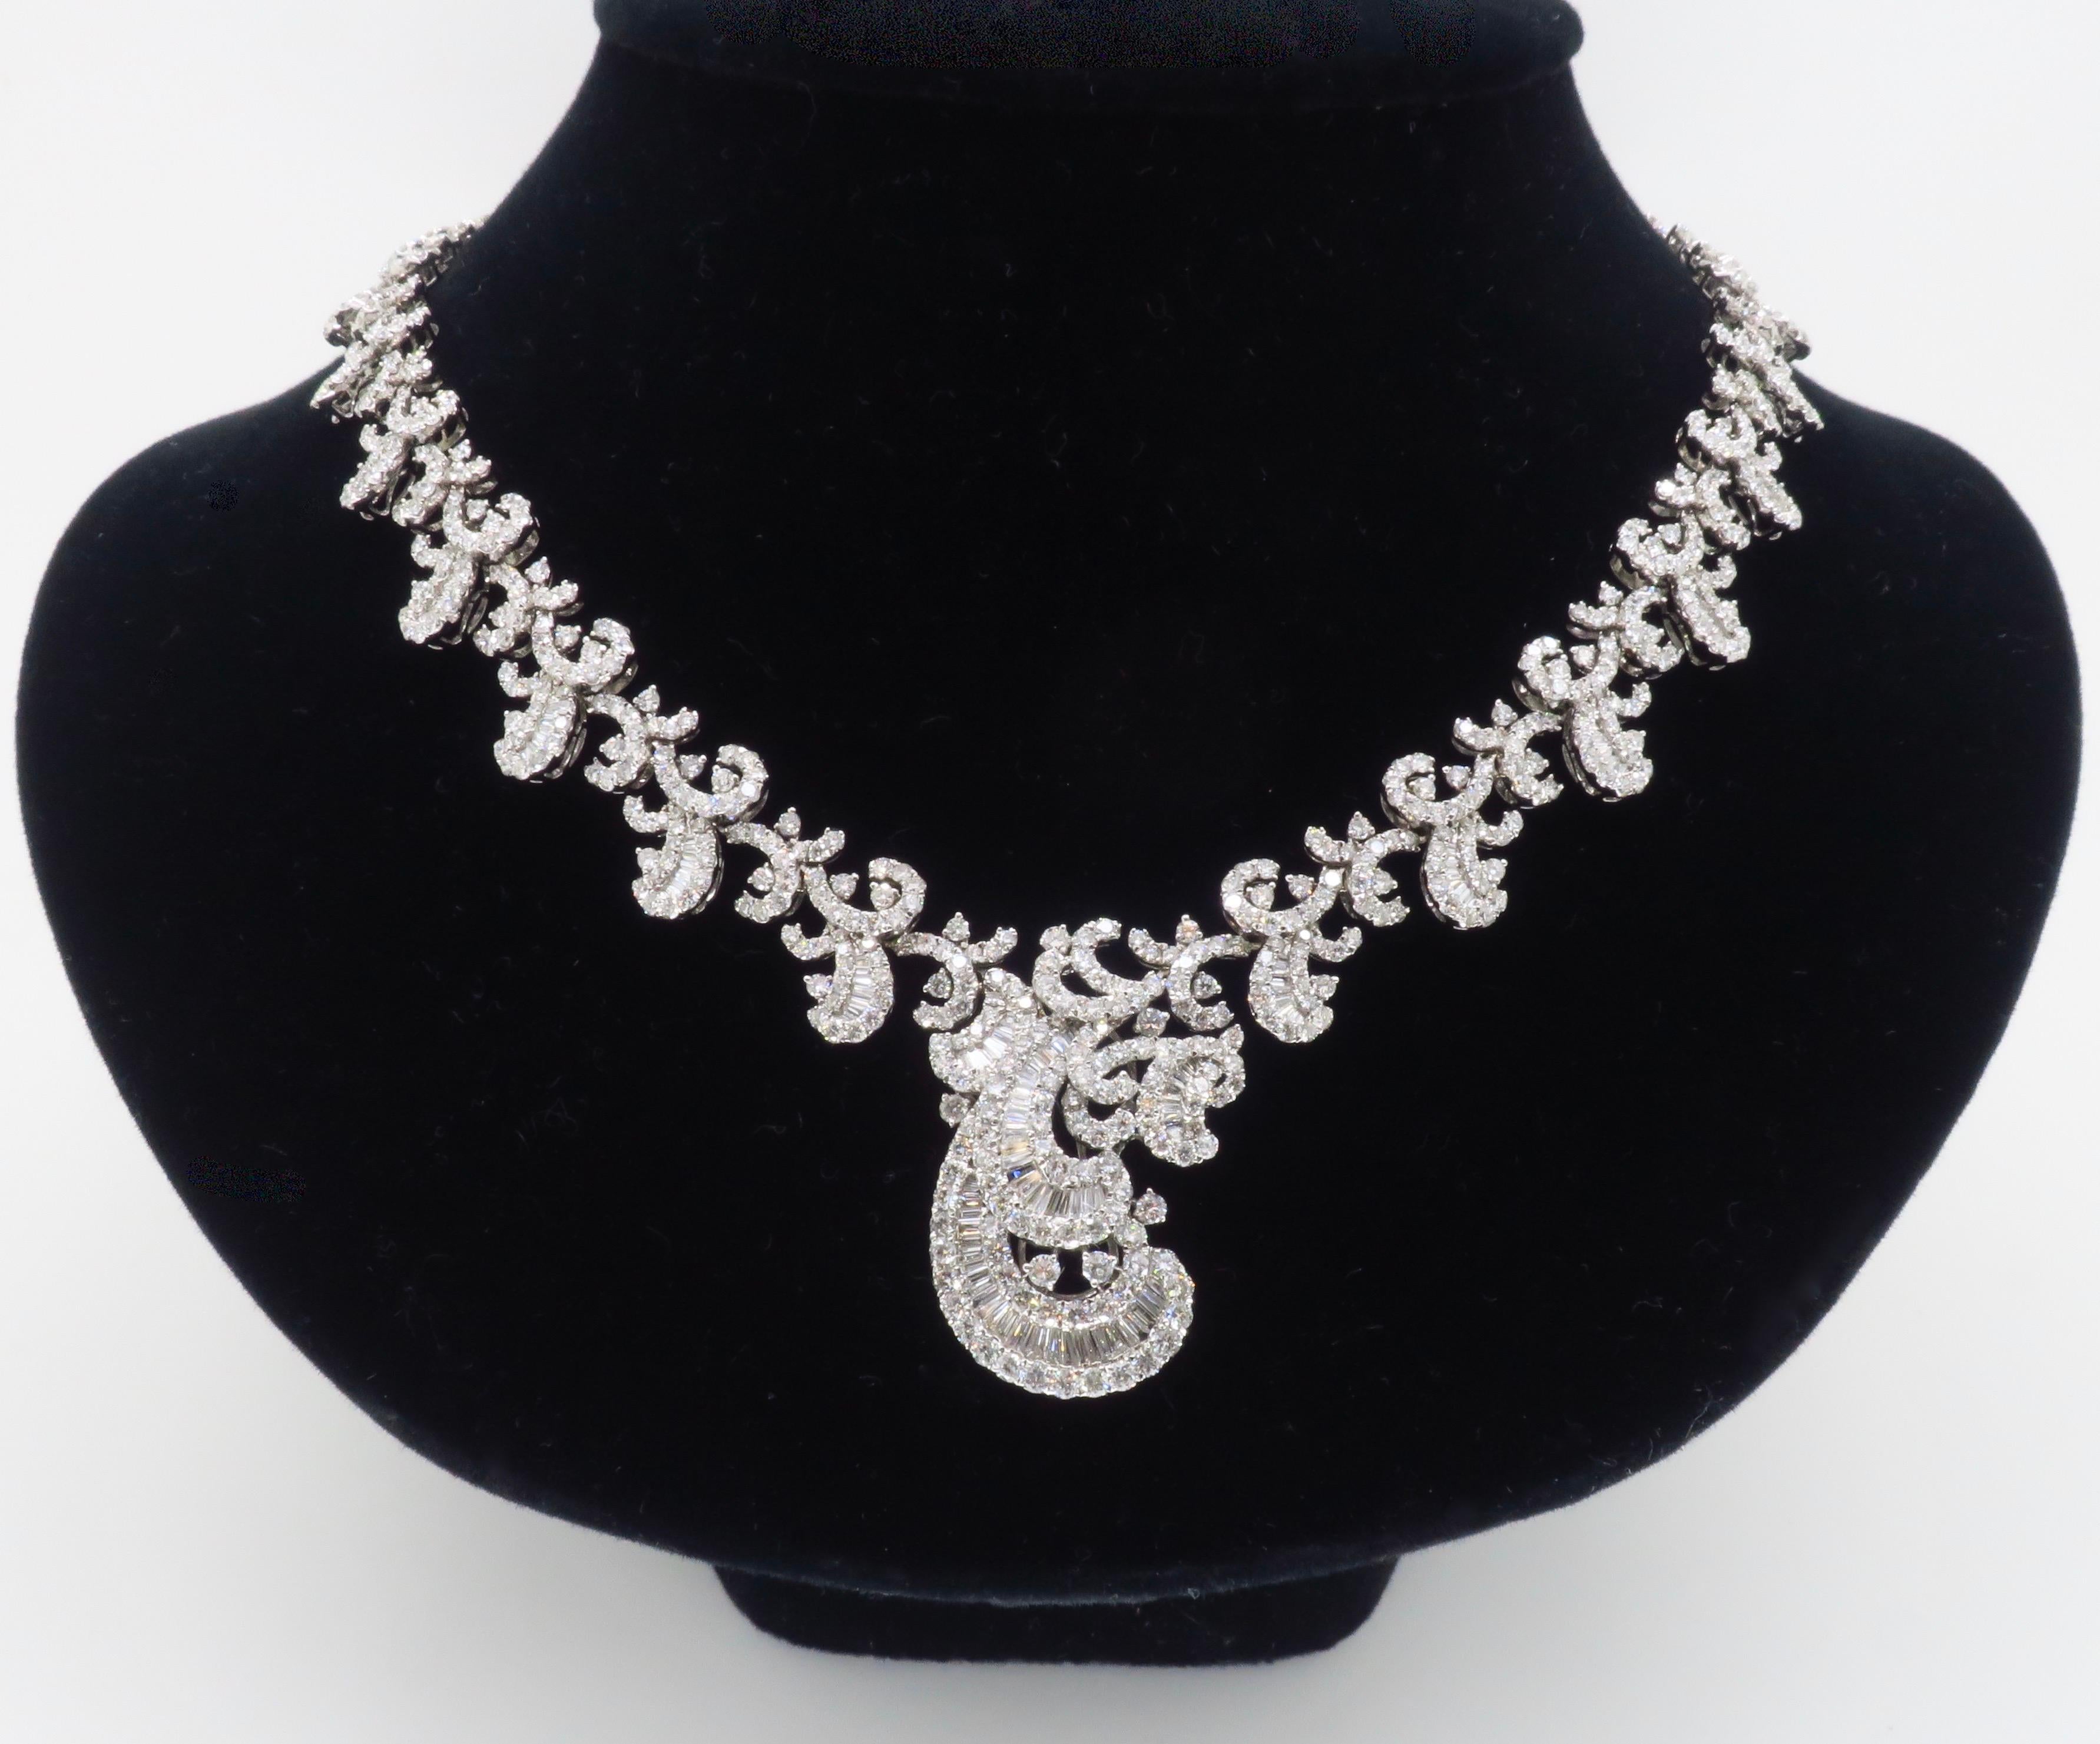 Intricate diamond necklace made in 18k white gold with 18.96ctw of diamonds. 

Total Diamond Carat Weight: 18.96CTW
Diamond Cut: Round Brilliant Cut & Baguette Cut 
Color: F-H
Clarity: VS-SI
Metal: 14K White Gold
Stamped: 